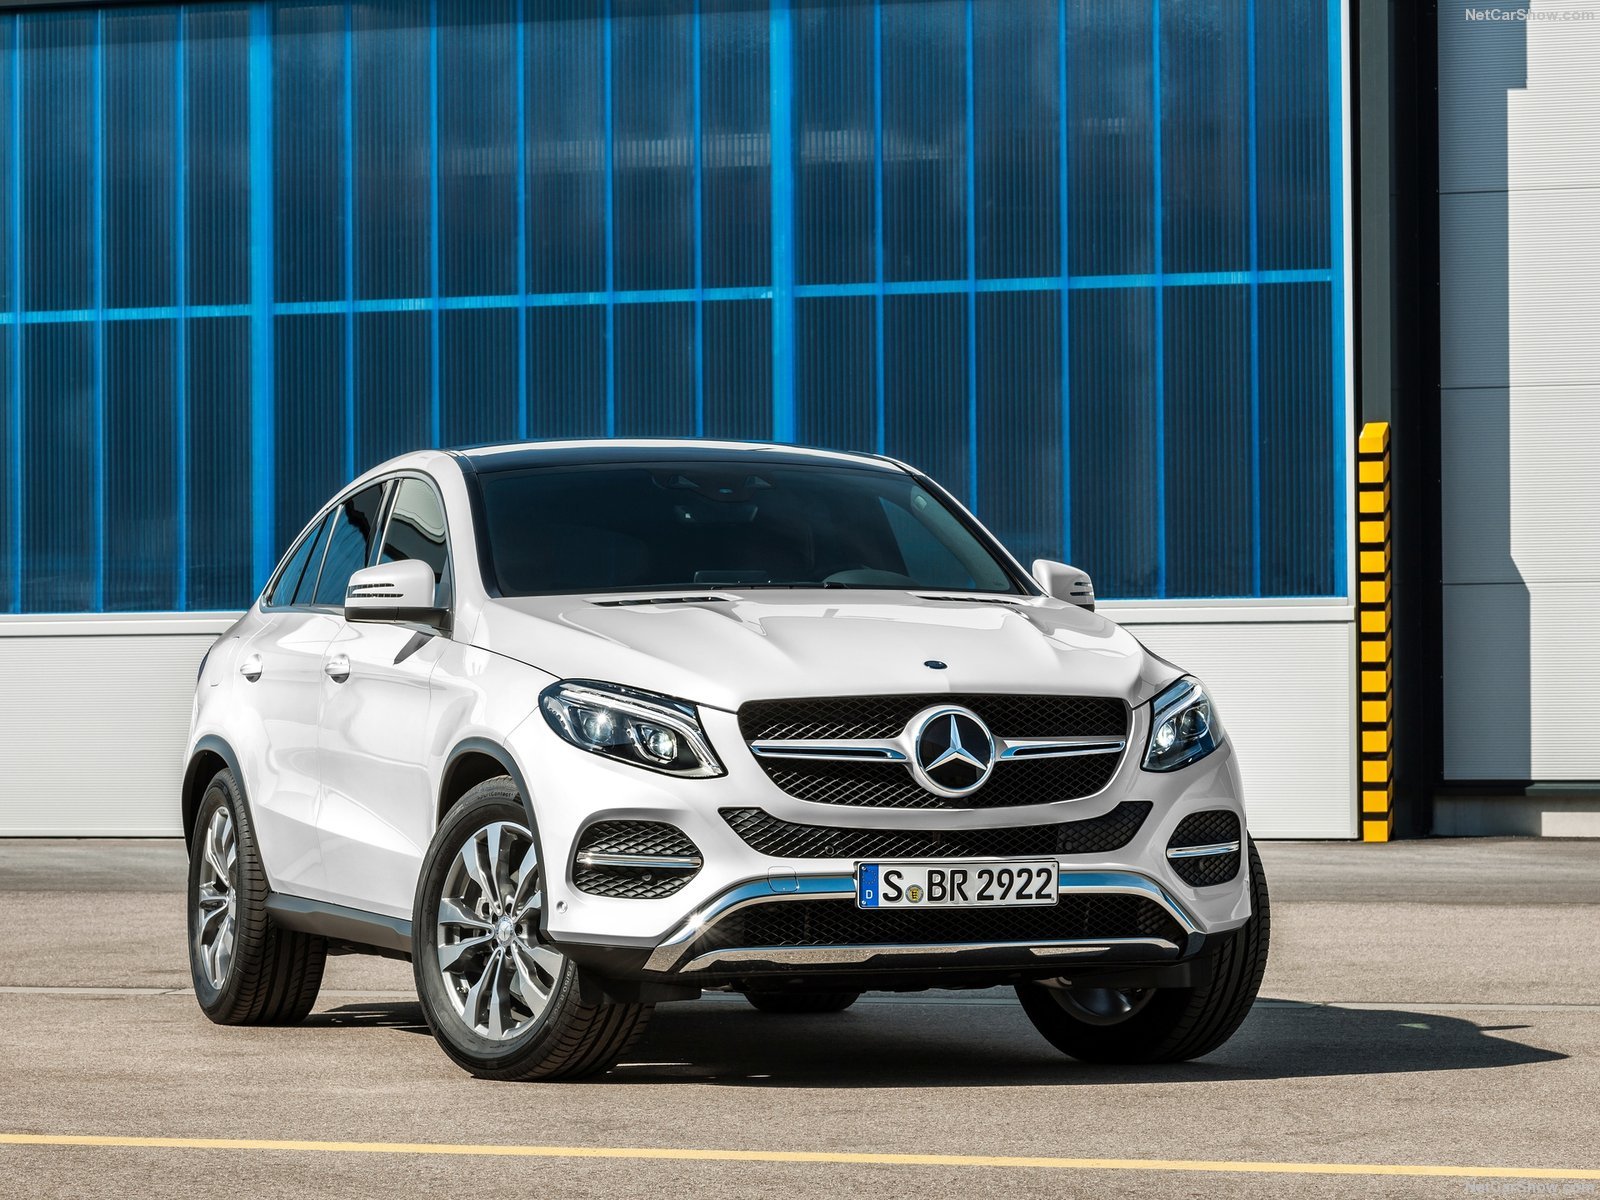 c292 , 2015, Awd, Benz, Coupe, Gle, Mercedes, Suv Wallpaper